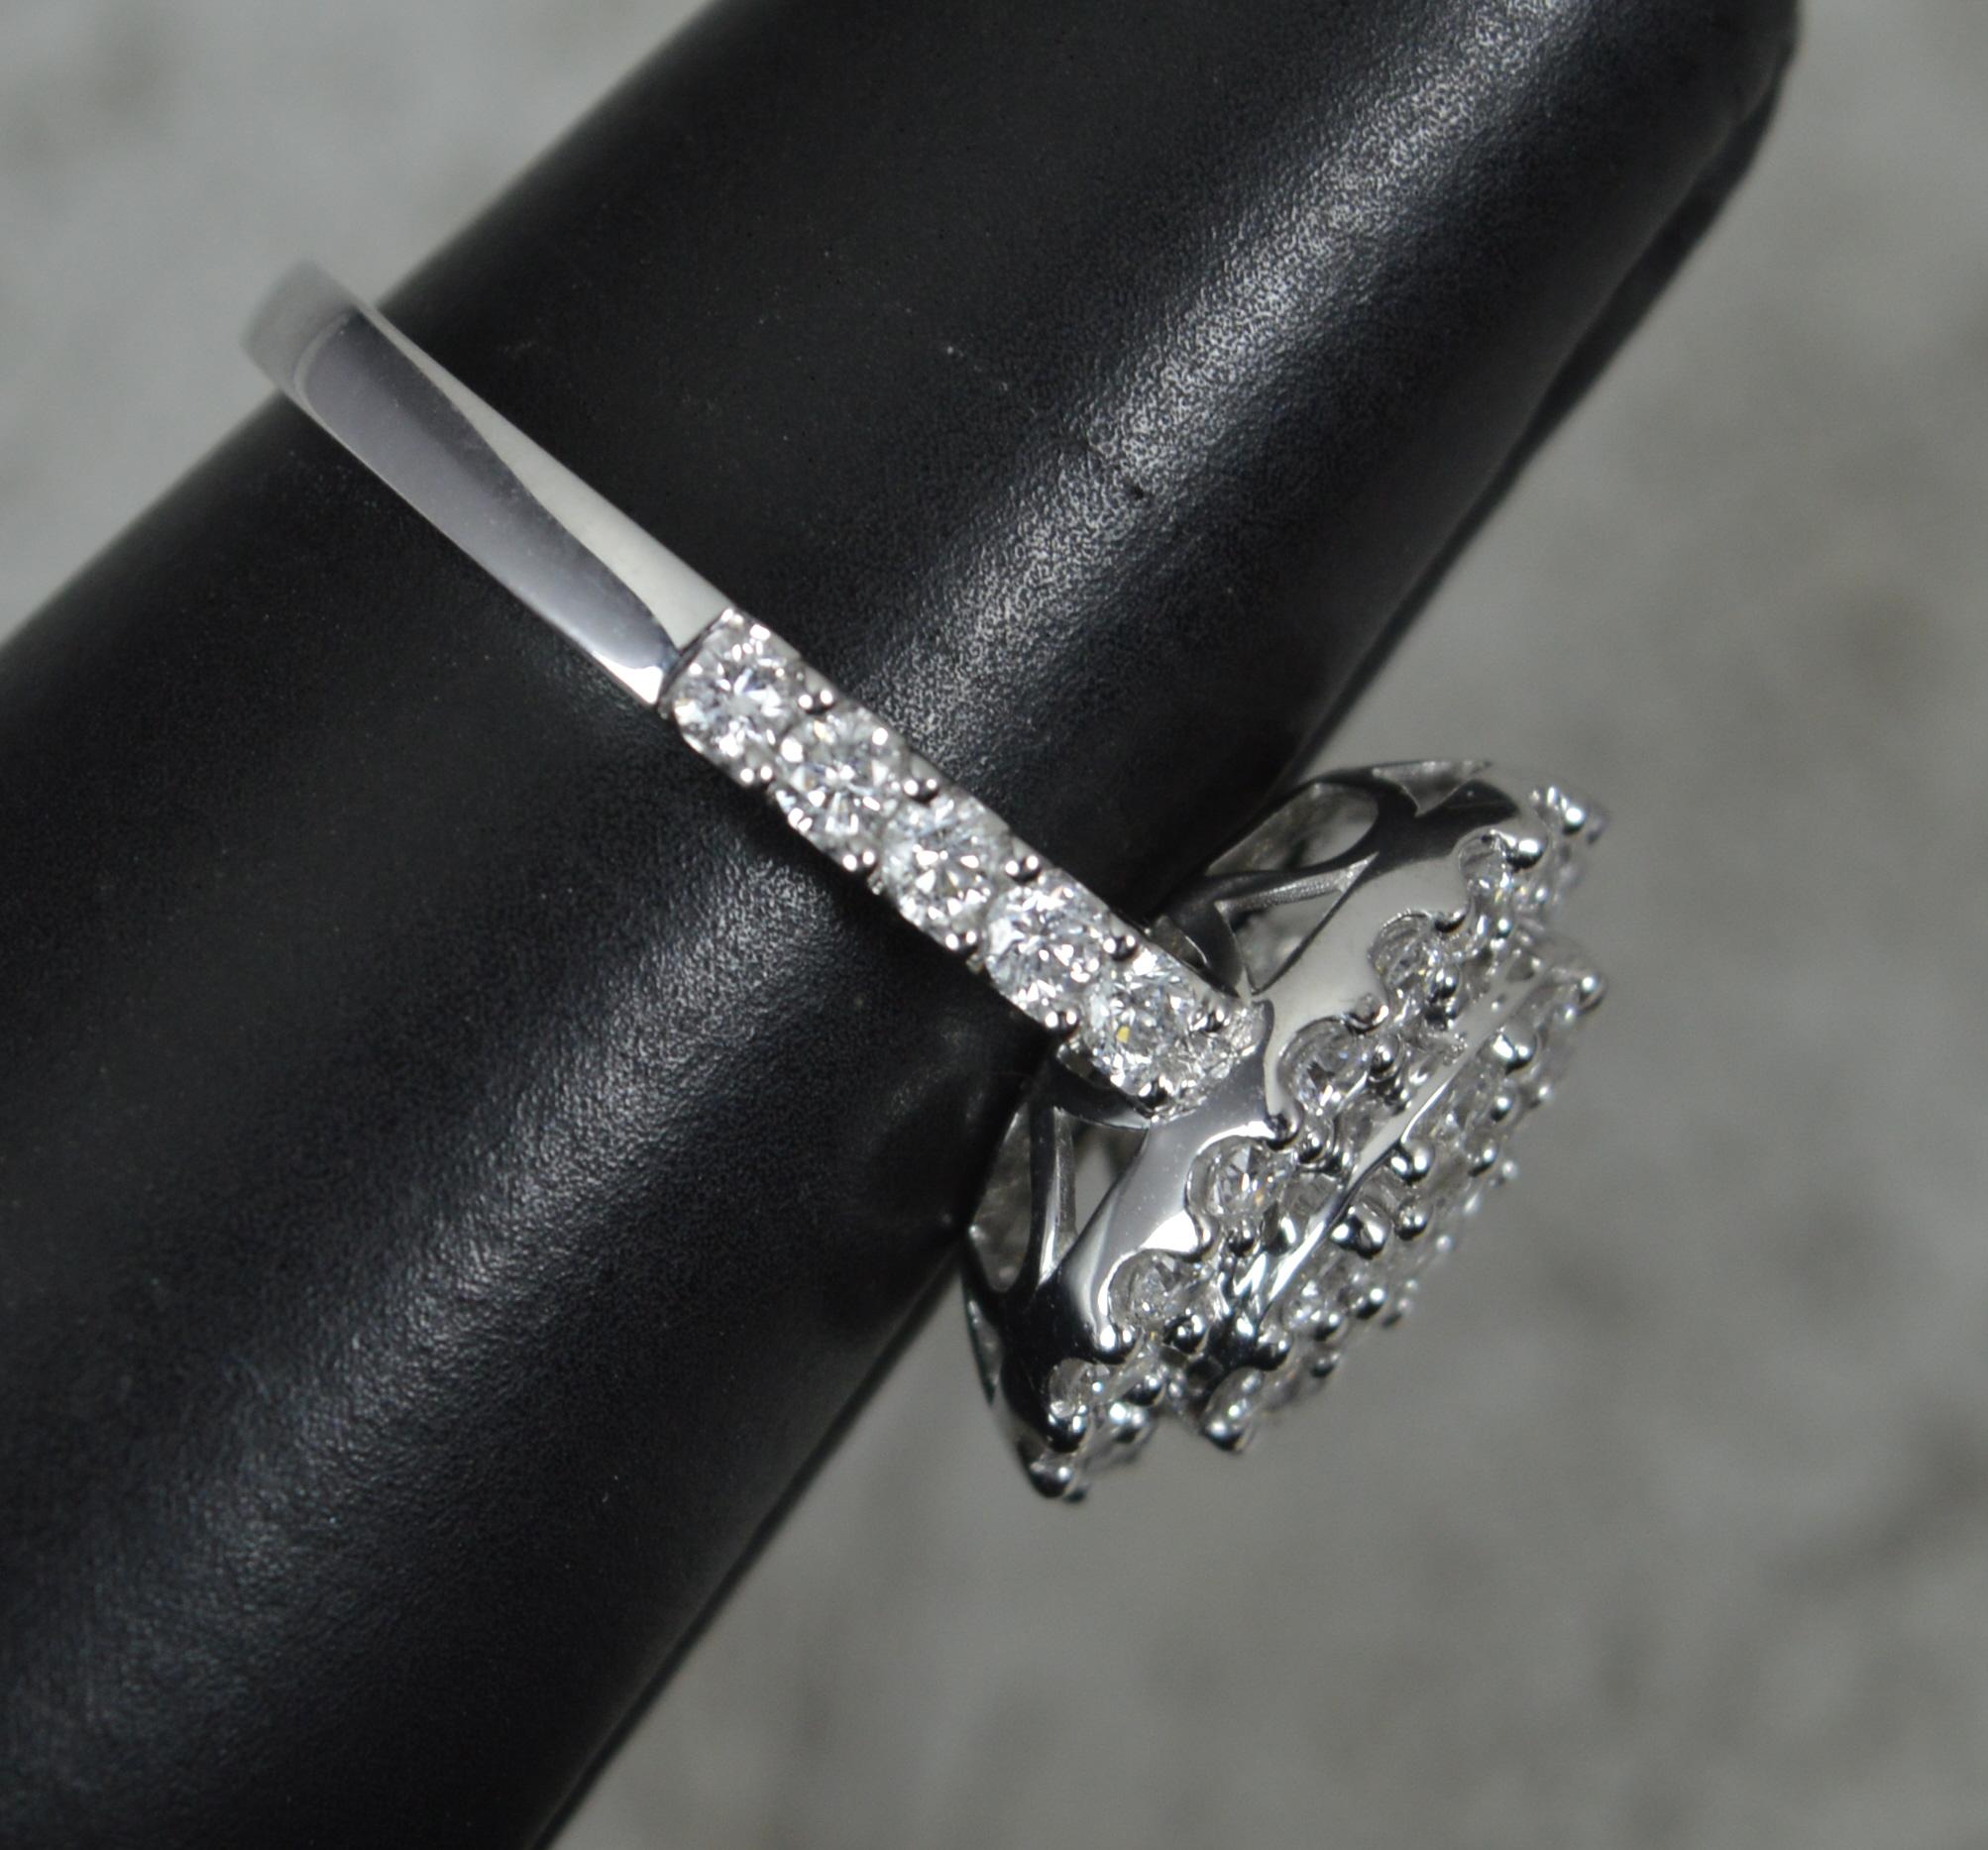 Quality Vs 1.25 Carat Diamond and 18 Carat White Gold Cluster Ring For Sale 4